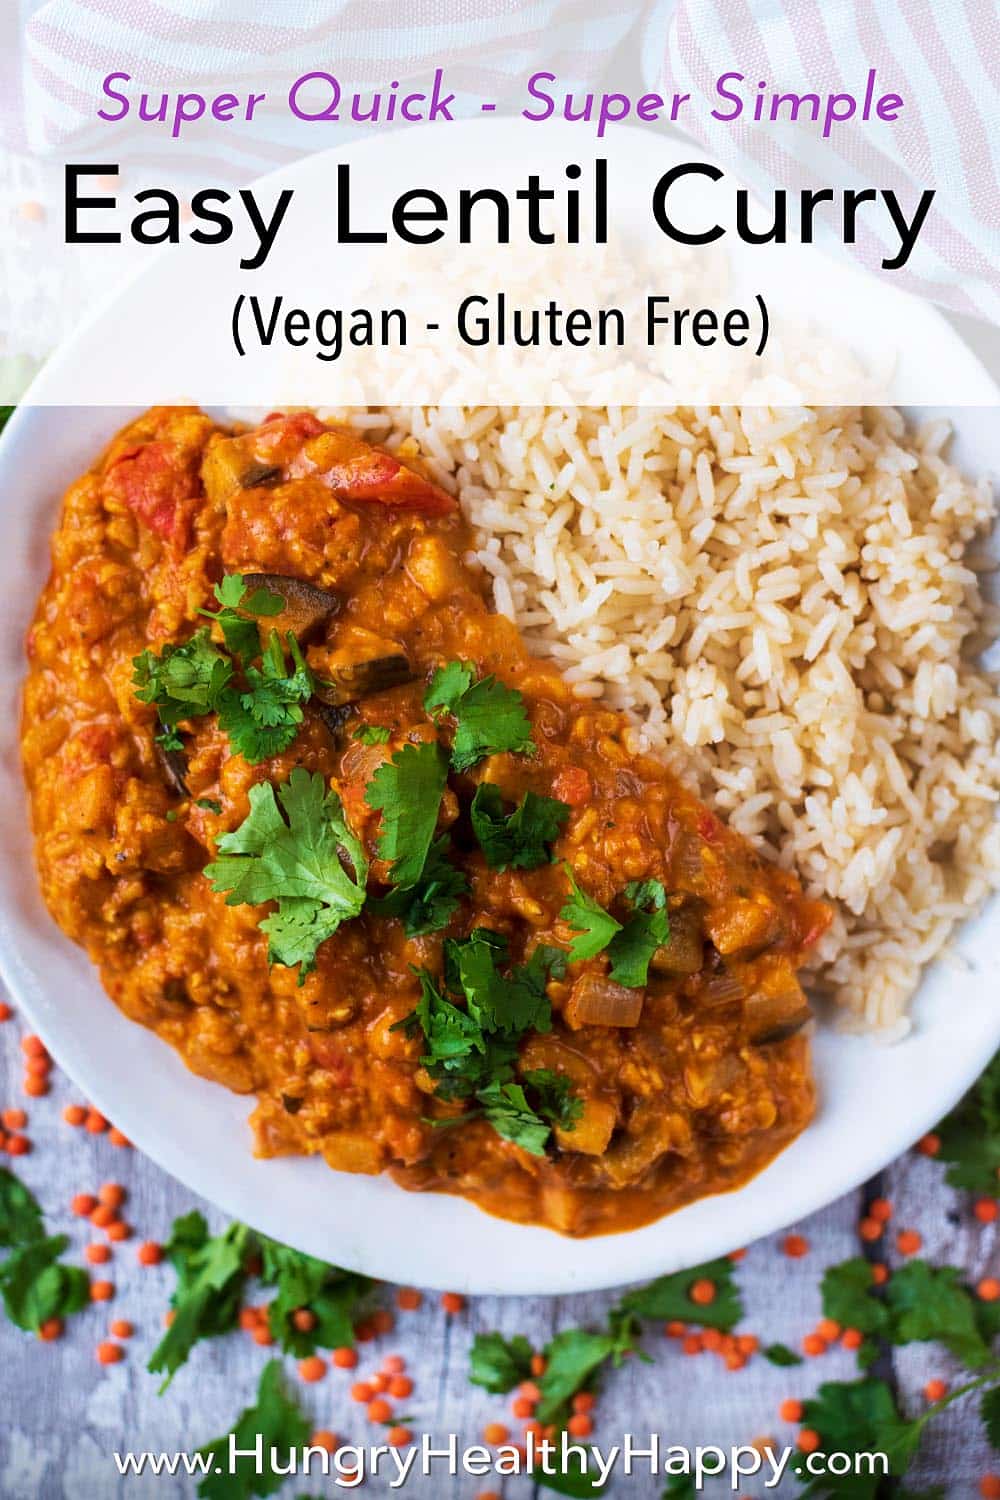 Easy Lentil Curry - Hungry Healthy Happy